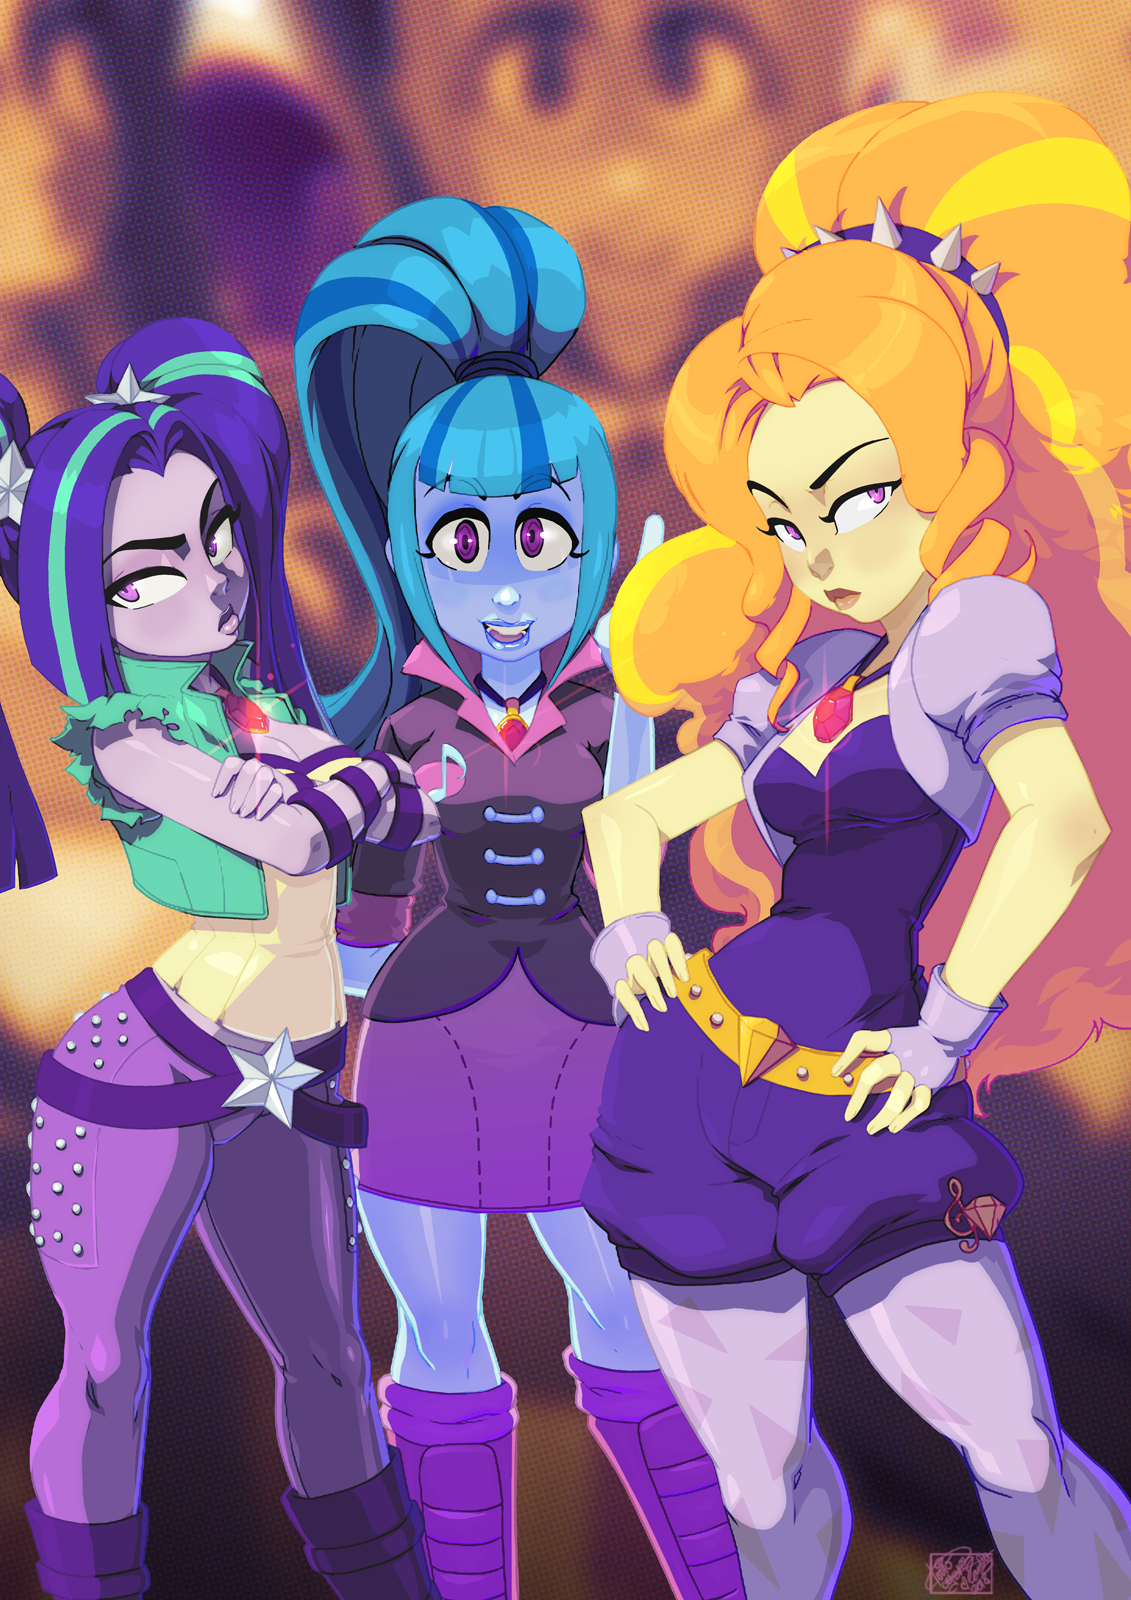 tovio-rogers: a commish of the dazzlings from MLP rainbow rocks  &lt; |D’‘‘‘‘‘‘‘‘